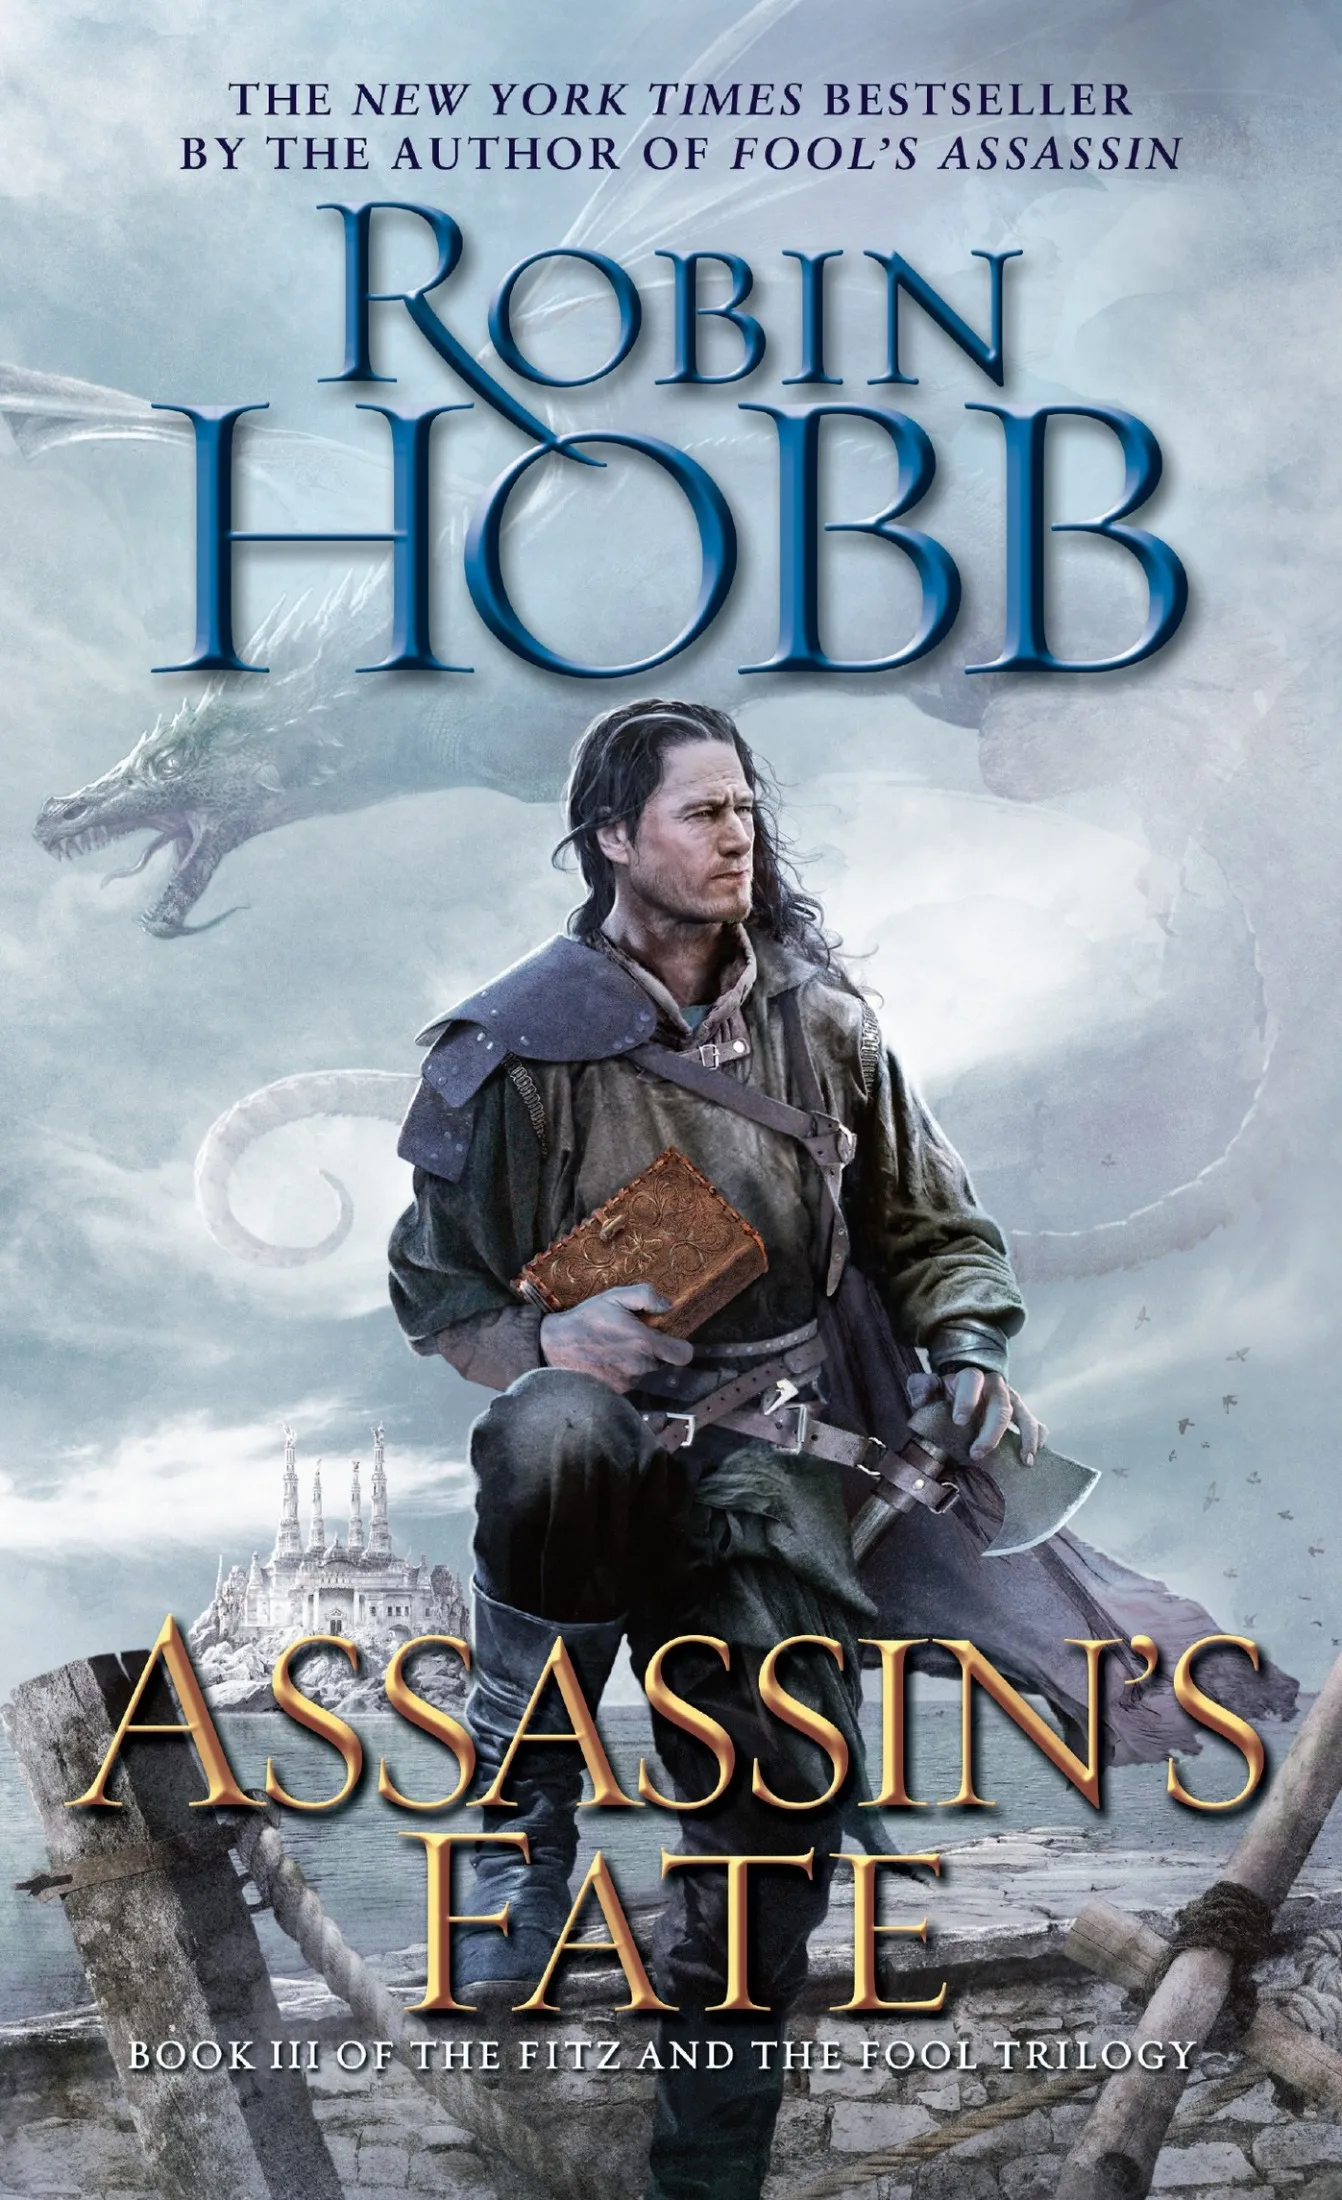 Assassin's Fate (The Fitz and the Fool Trilogy #3) (The Realm of the Elderlings #16)